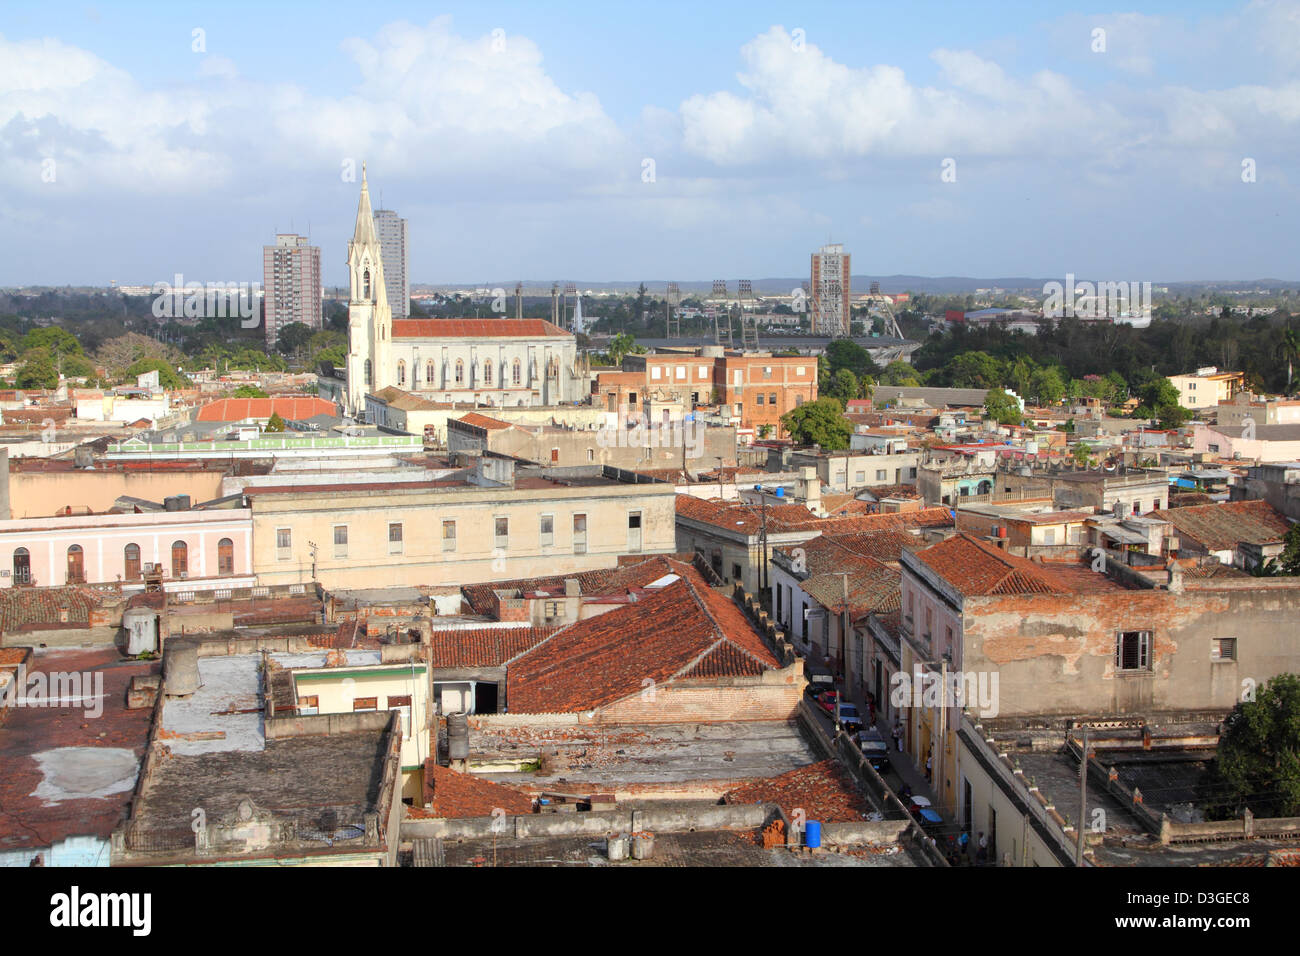 Camaguey, Cuba - old town listed on UNESCO World Heritage List. Aerial cityscape view. Stock Photo